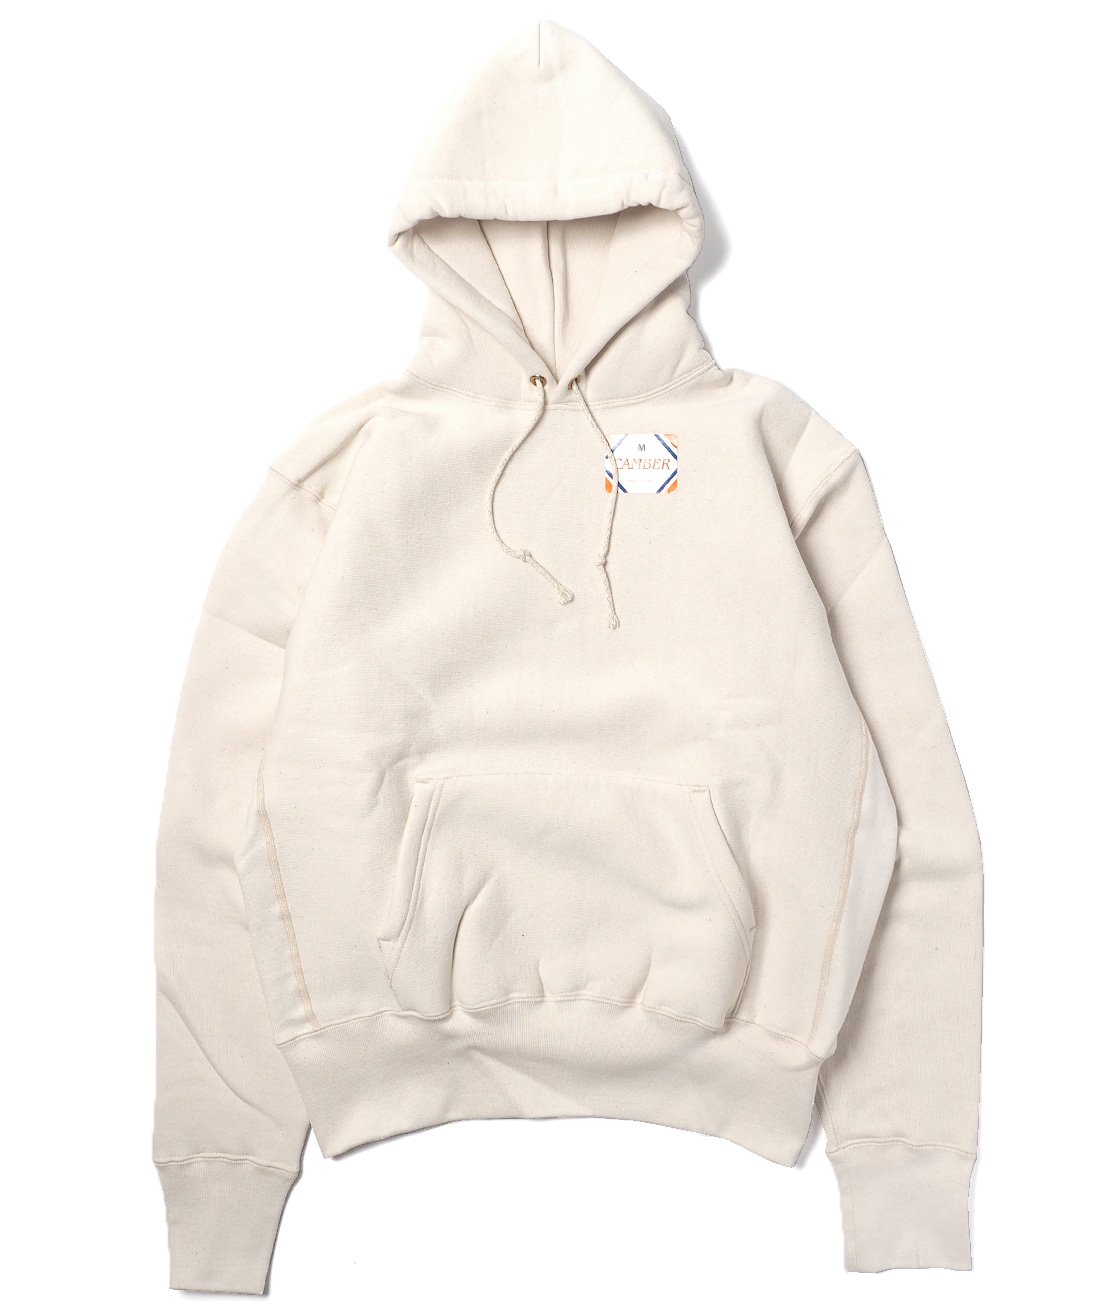 CAMBER】#232 CROSS-KNIT P/O HOODED SWEAT - NATURAL キャンバー